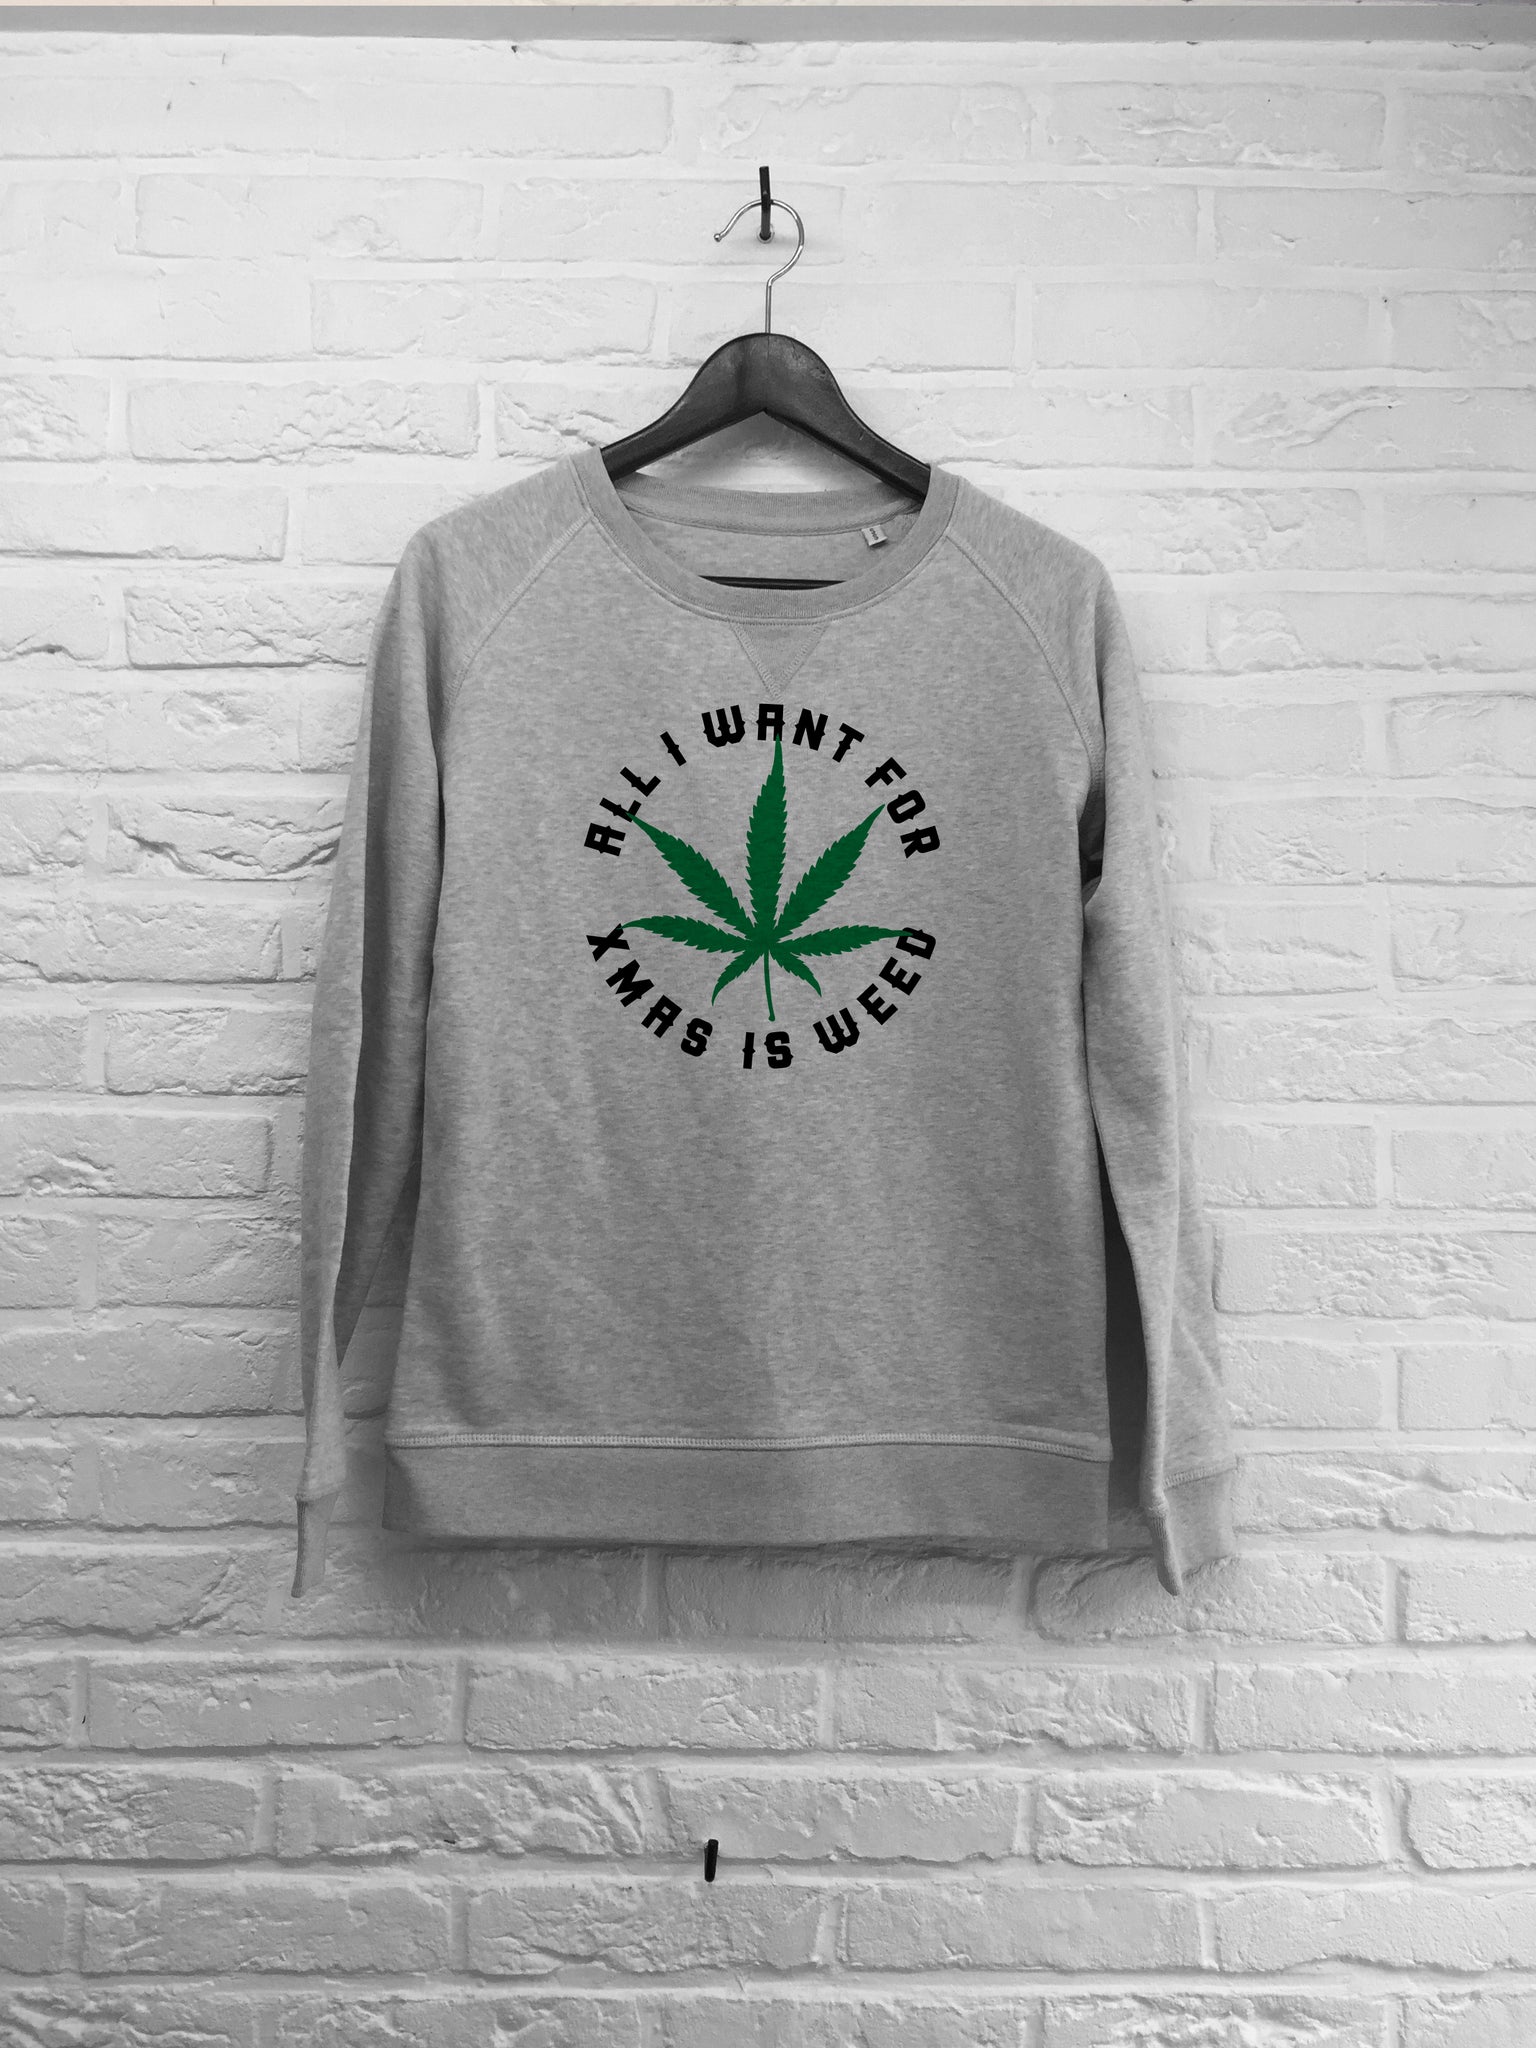 All I want for xmas is weed - Sweat - Femme-Sweat shirts-Atelier Amelot